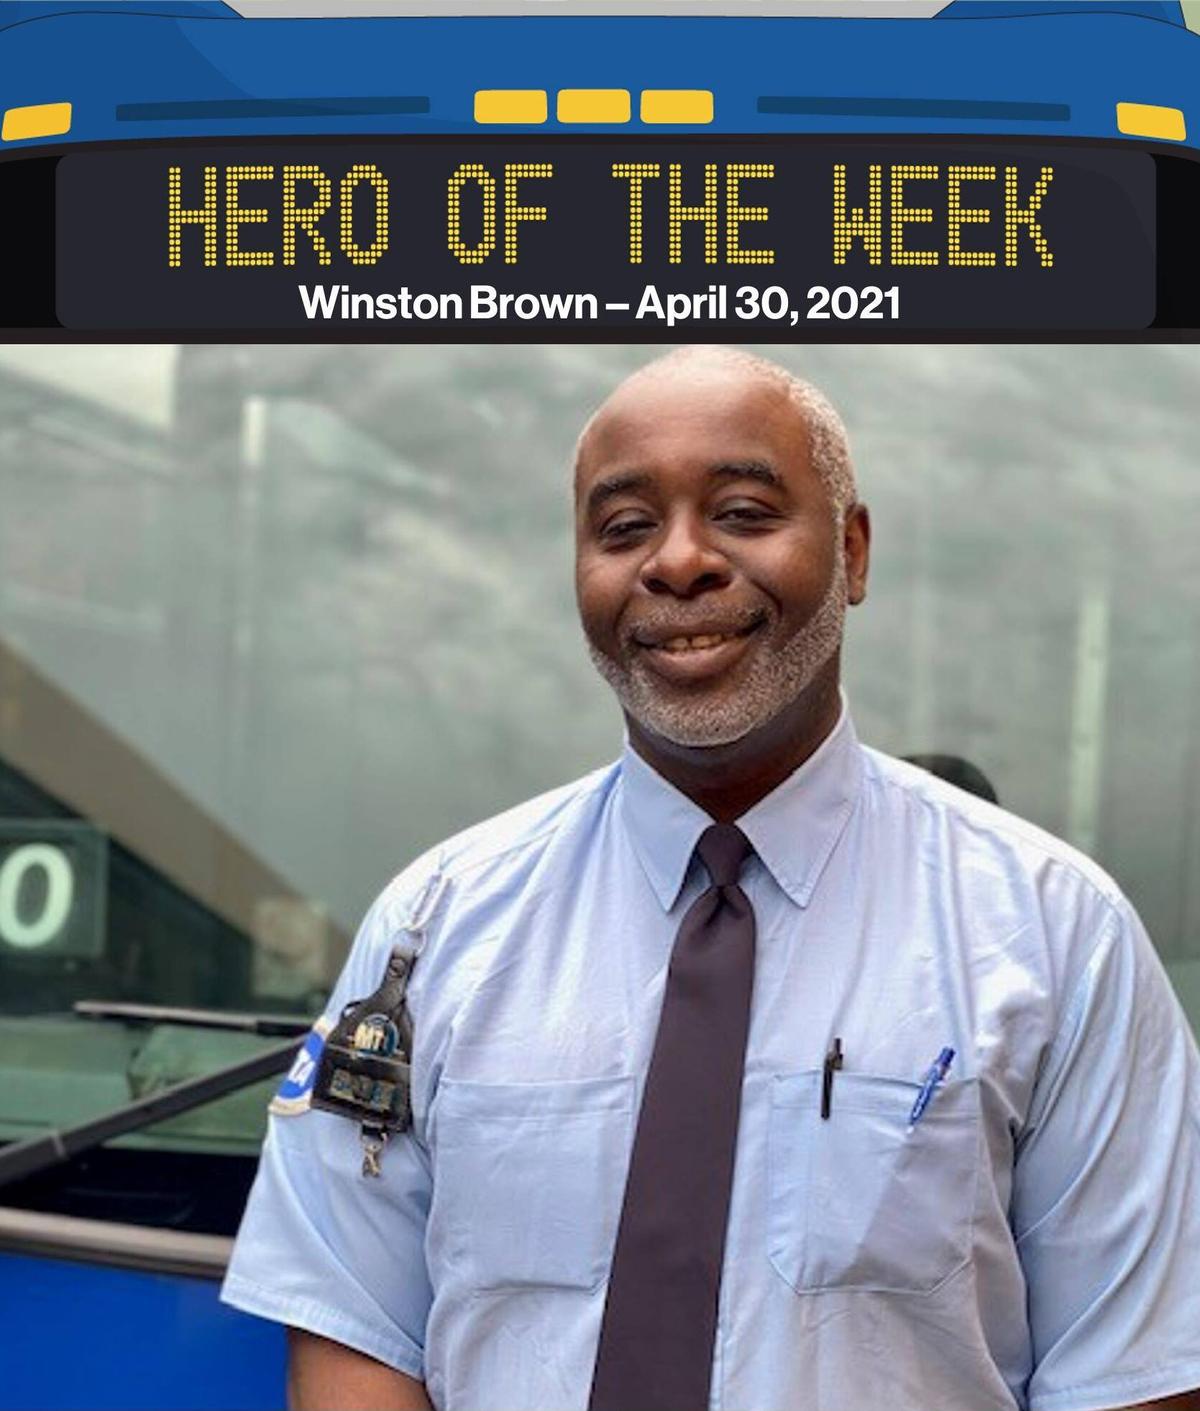 Winston Brown, a bus operator with New York City's Metropolitan Transportation Authority. (Courtesy of <a href="https://www.facebook.com/mta/">Metropolitan Transportation Authority</a>)